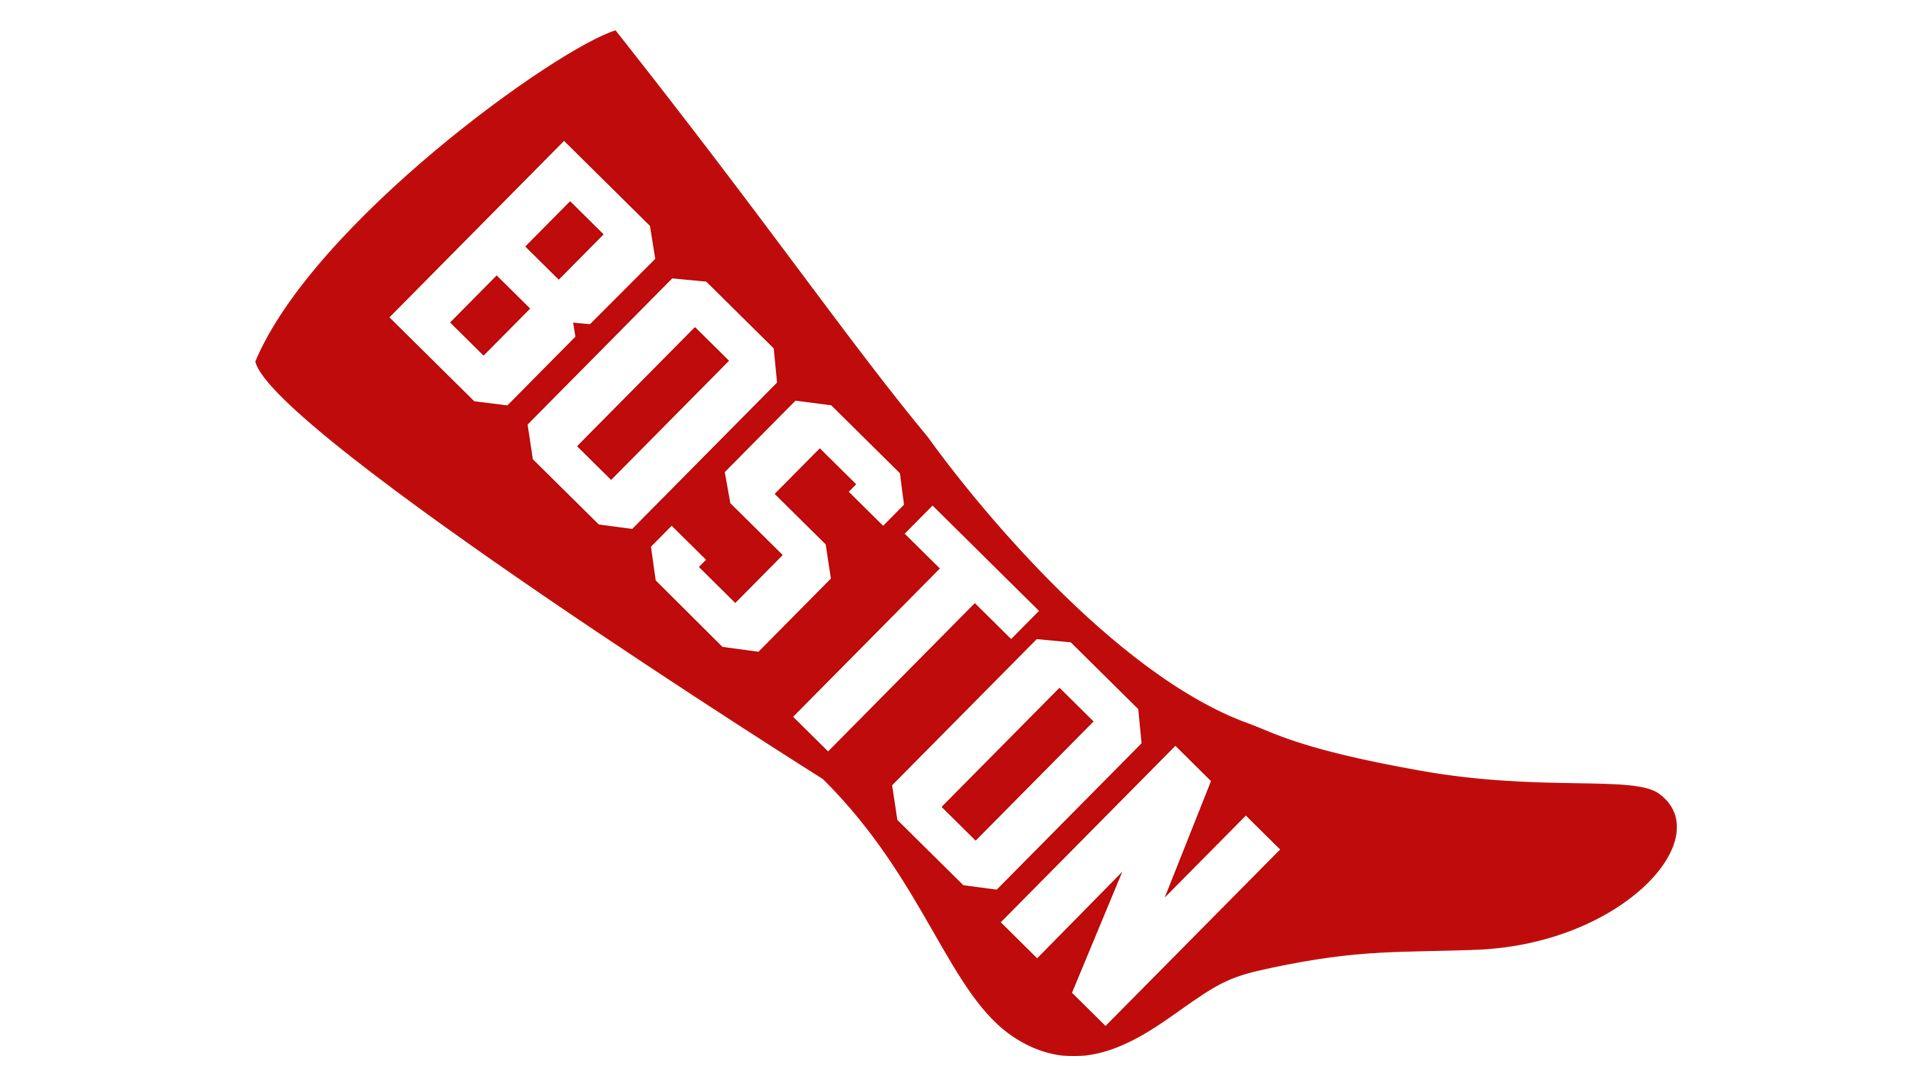 Red Socks Logo - Boston Red Sox Logo, Boston Red Sox Symbol Meaning, History